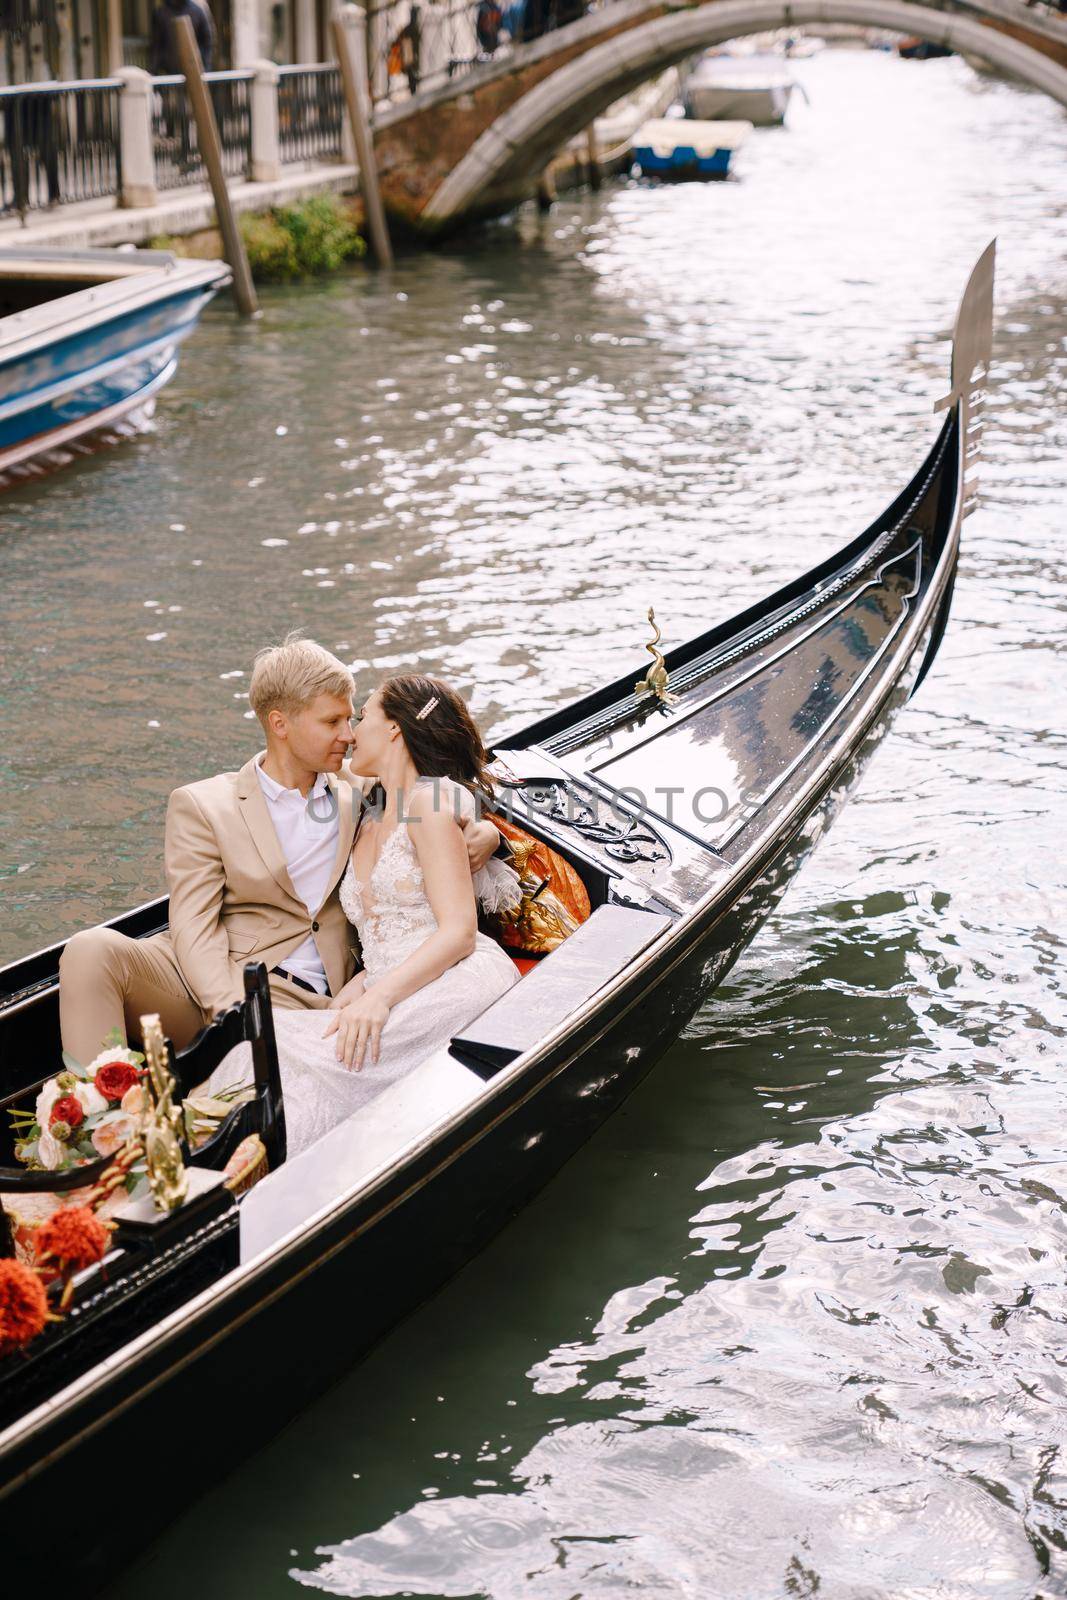 Italy wedding in Venice. The bride and groom ride in a classic wooden gondola along a narrow Venetian canal. Close-up of cuddles newlyweds. by Nadtochiy